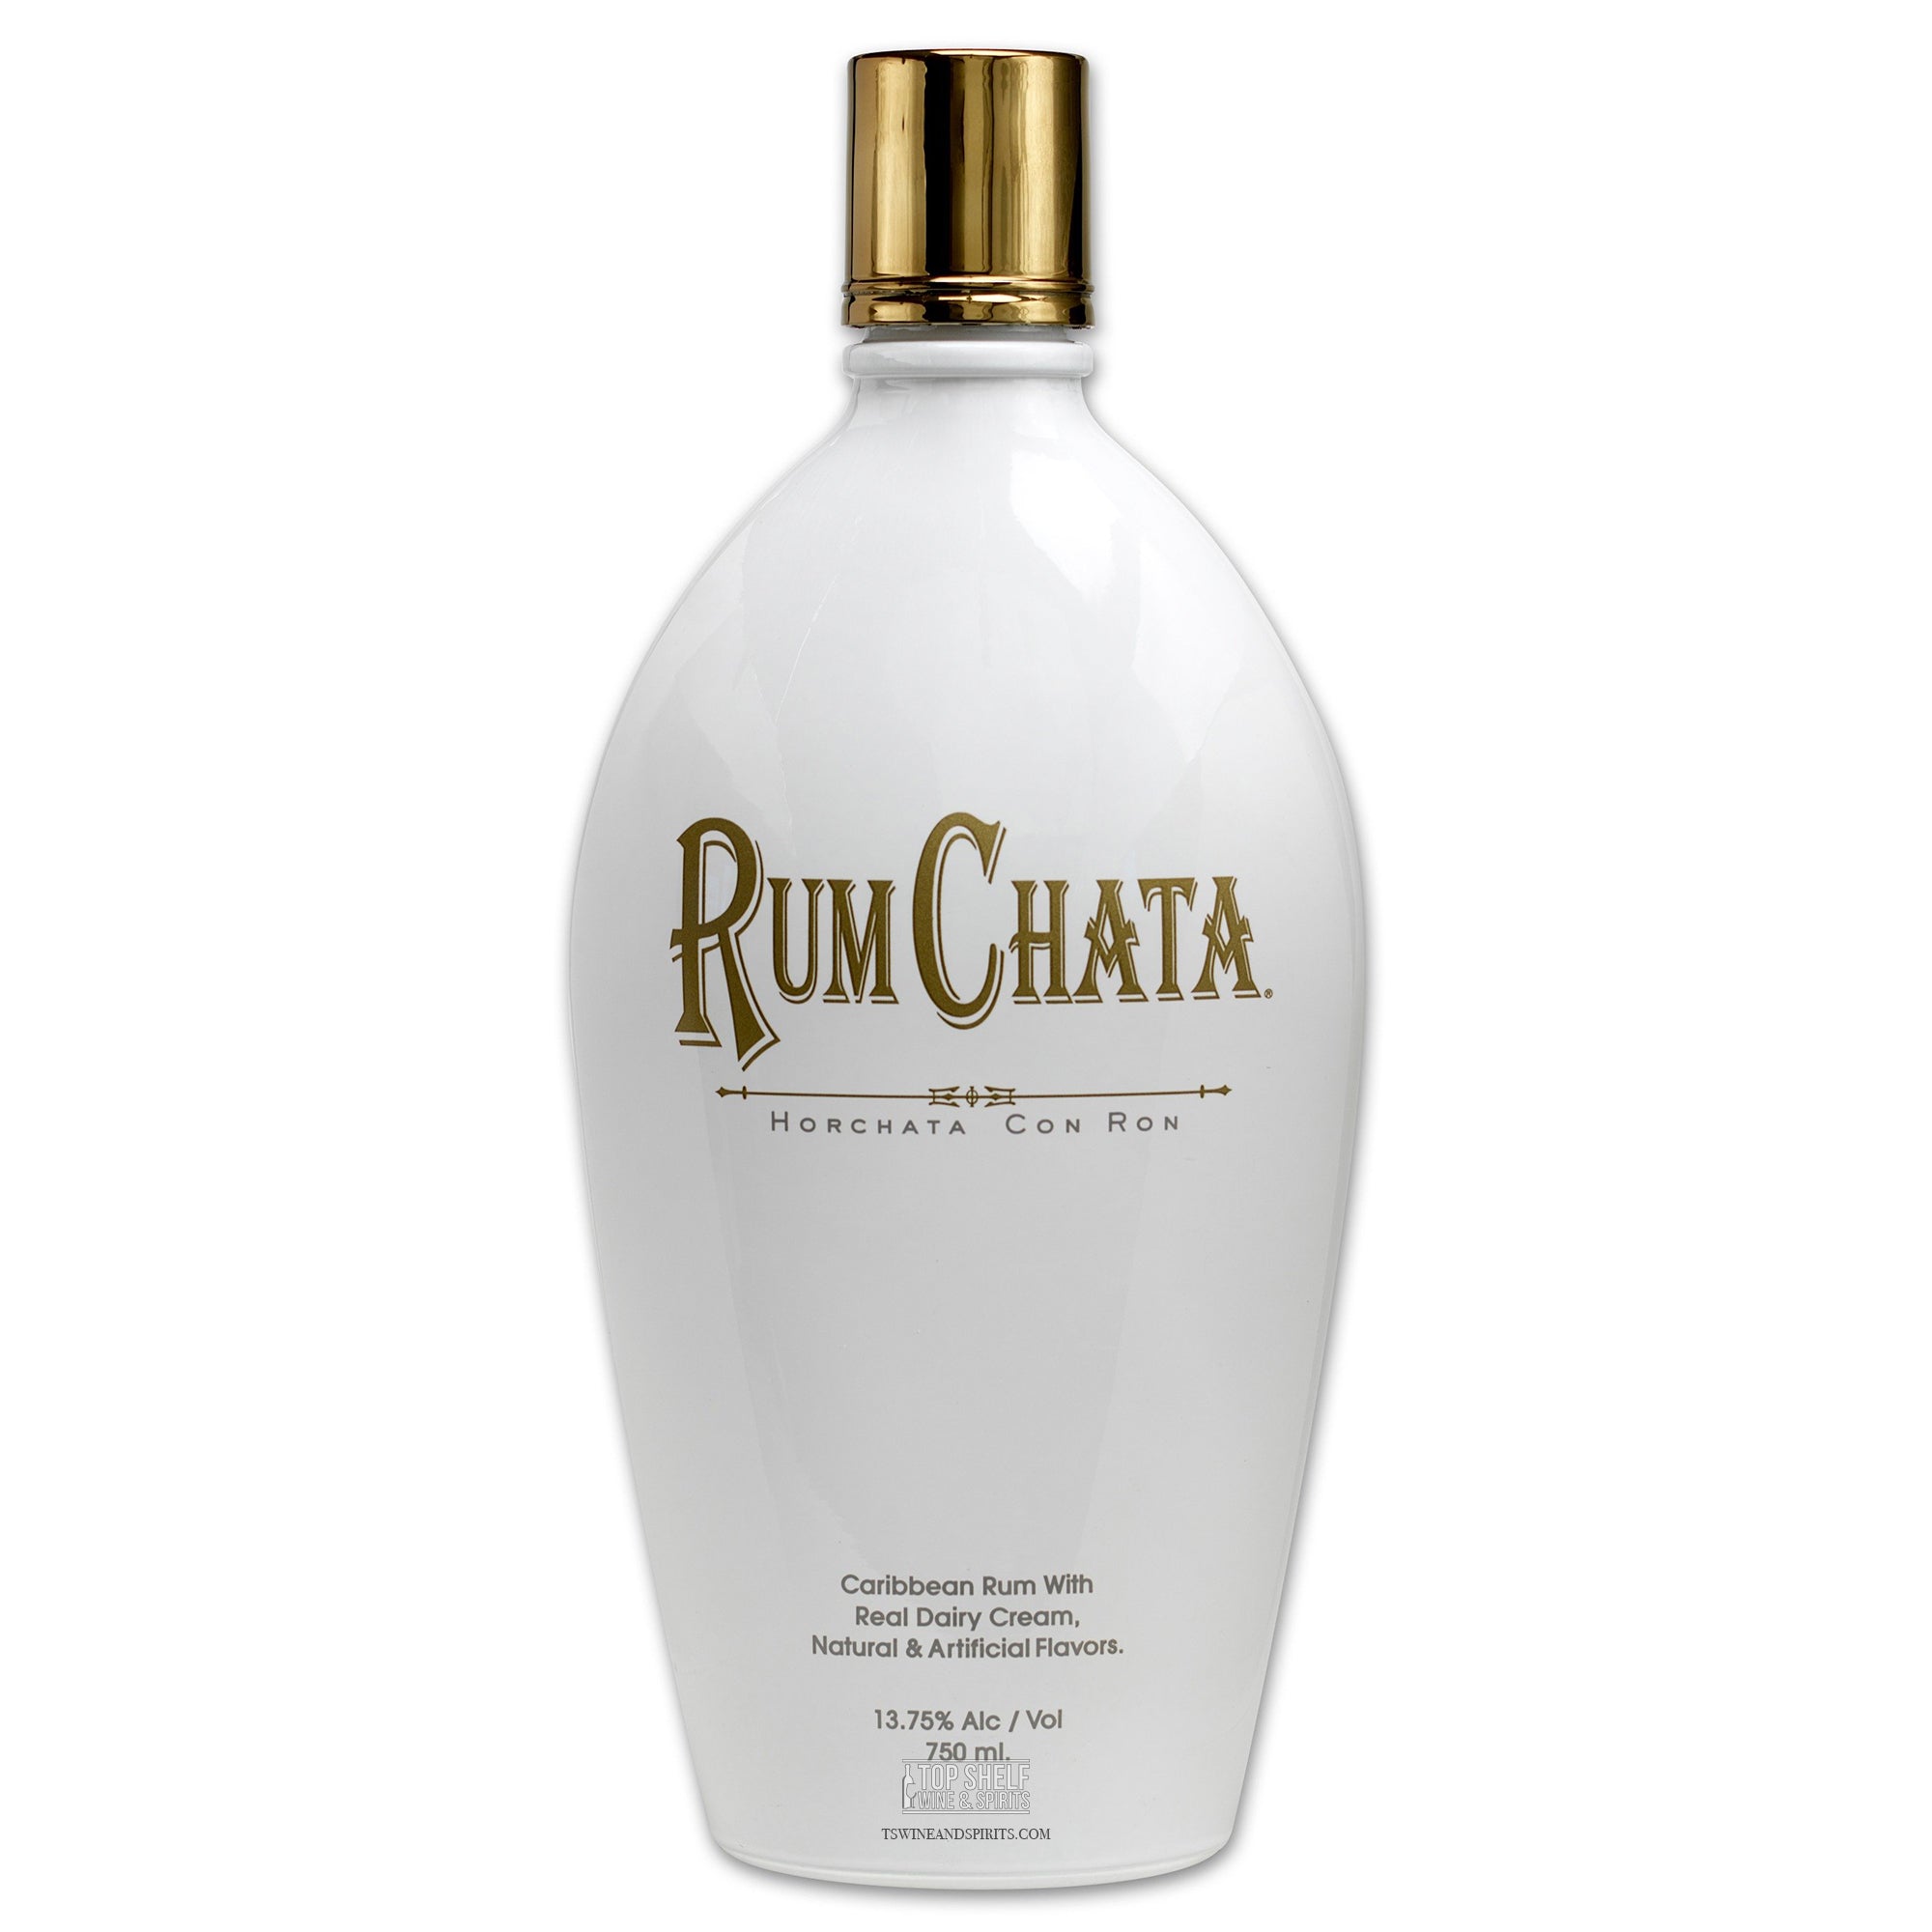 RumChata Horchata Con Ron (with real dairy cream)